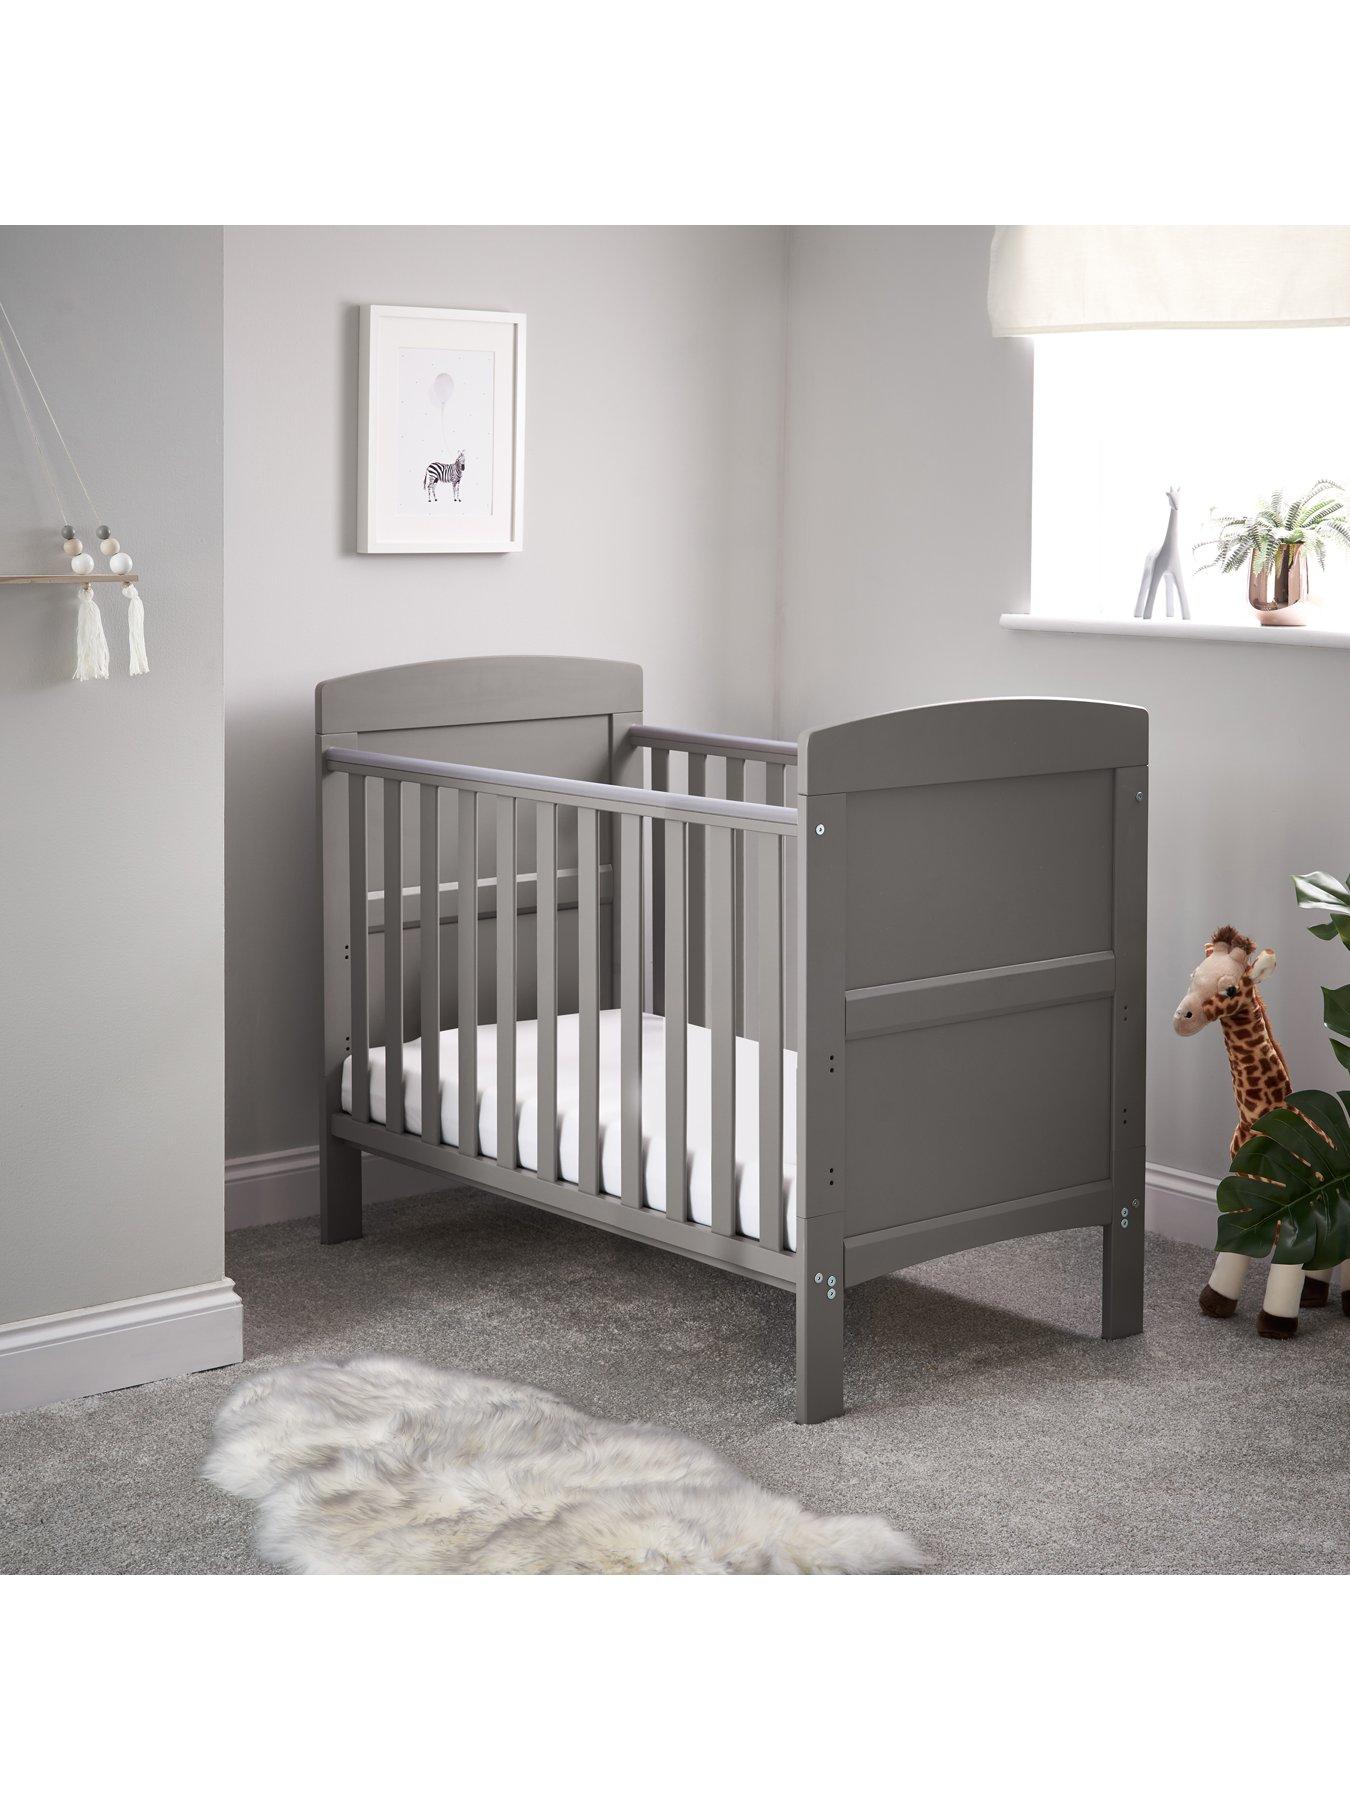 Obaby | Cots | | Child baby & furniture beds Nursery | & Ireland cot Very